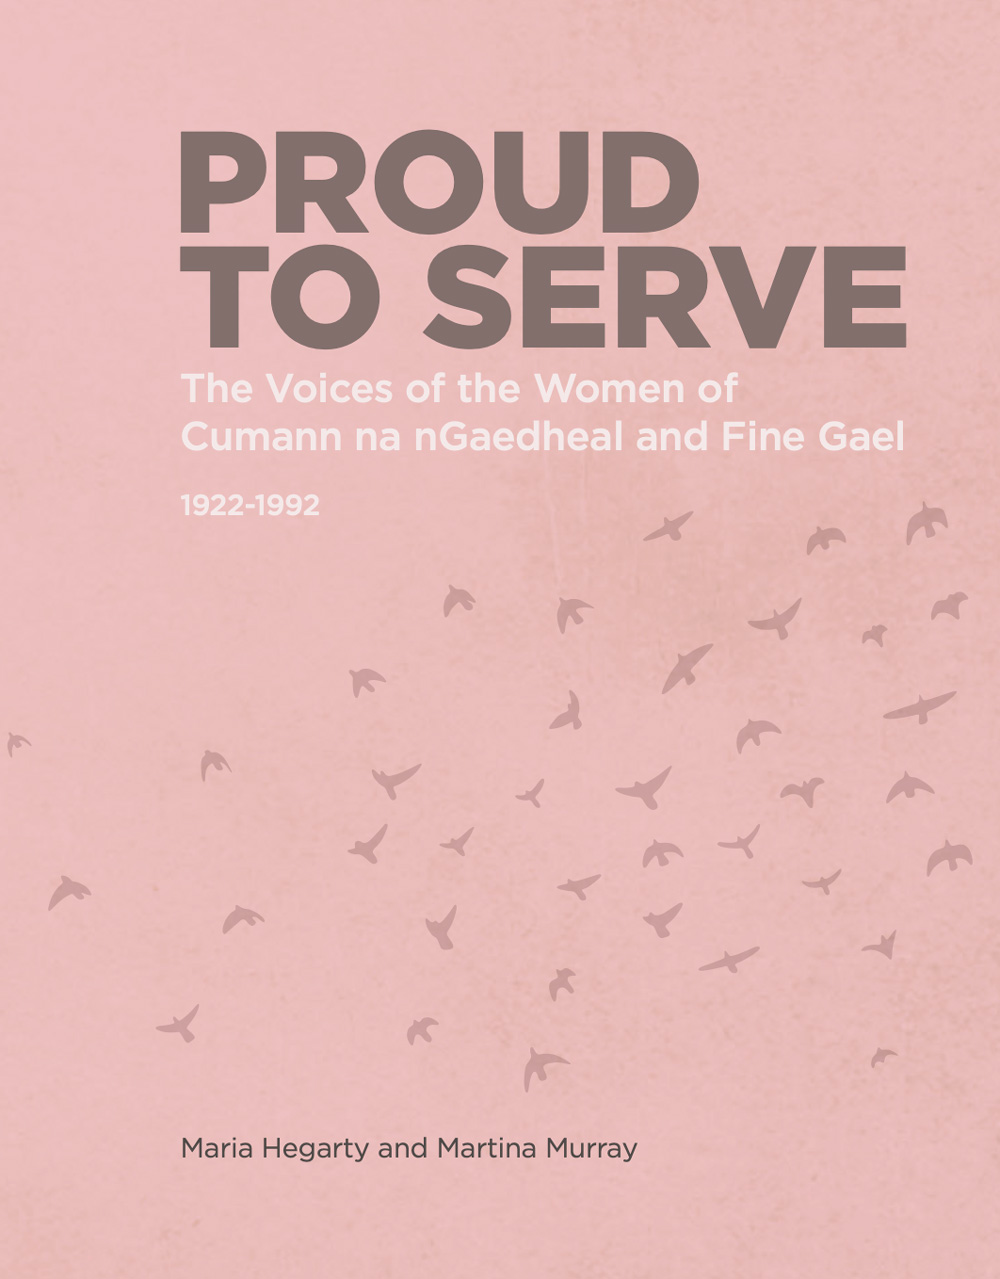 Book cover - PROUD TO SERVE